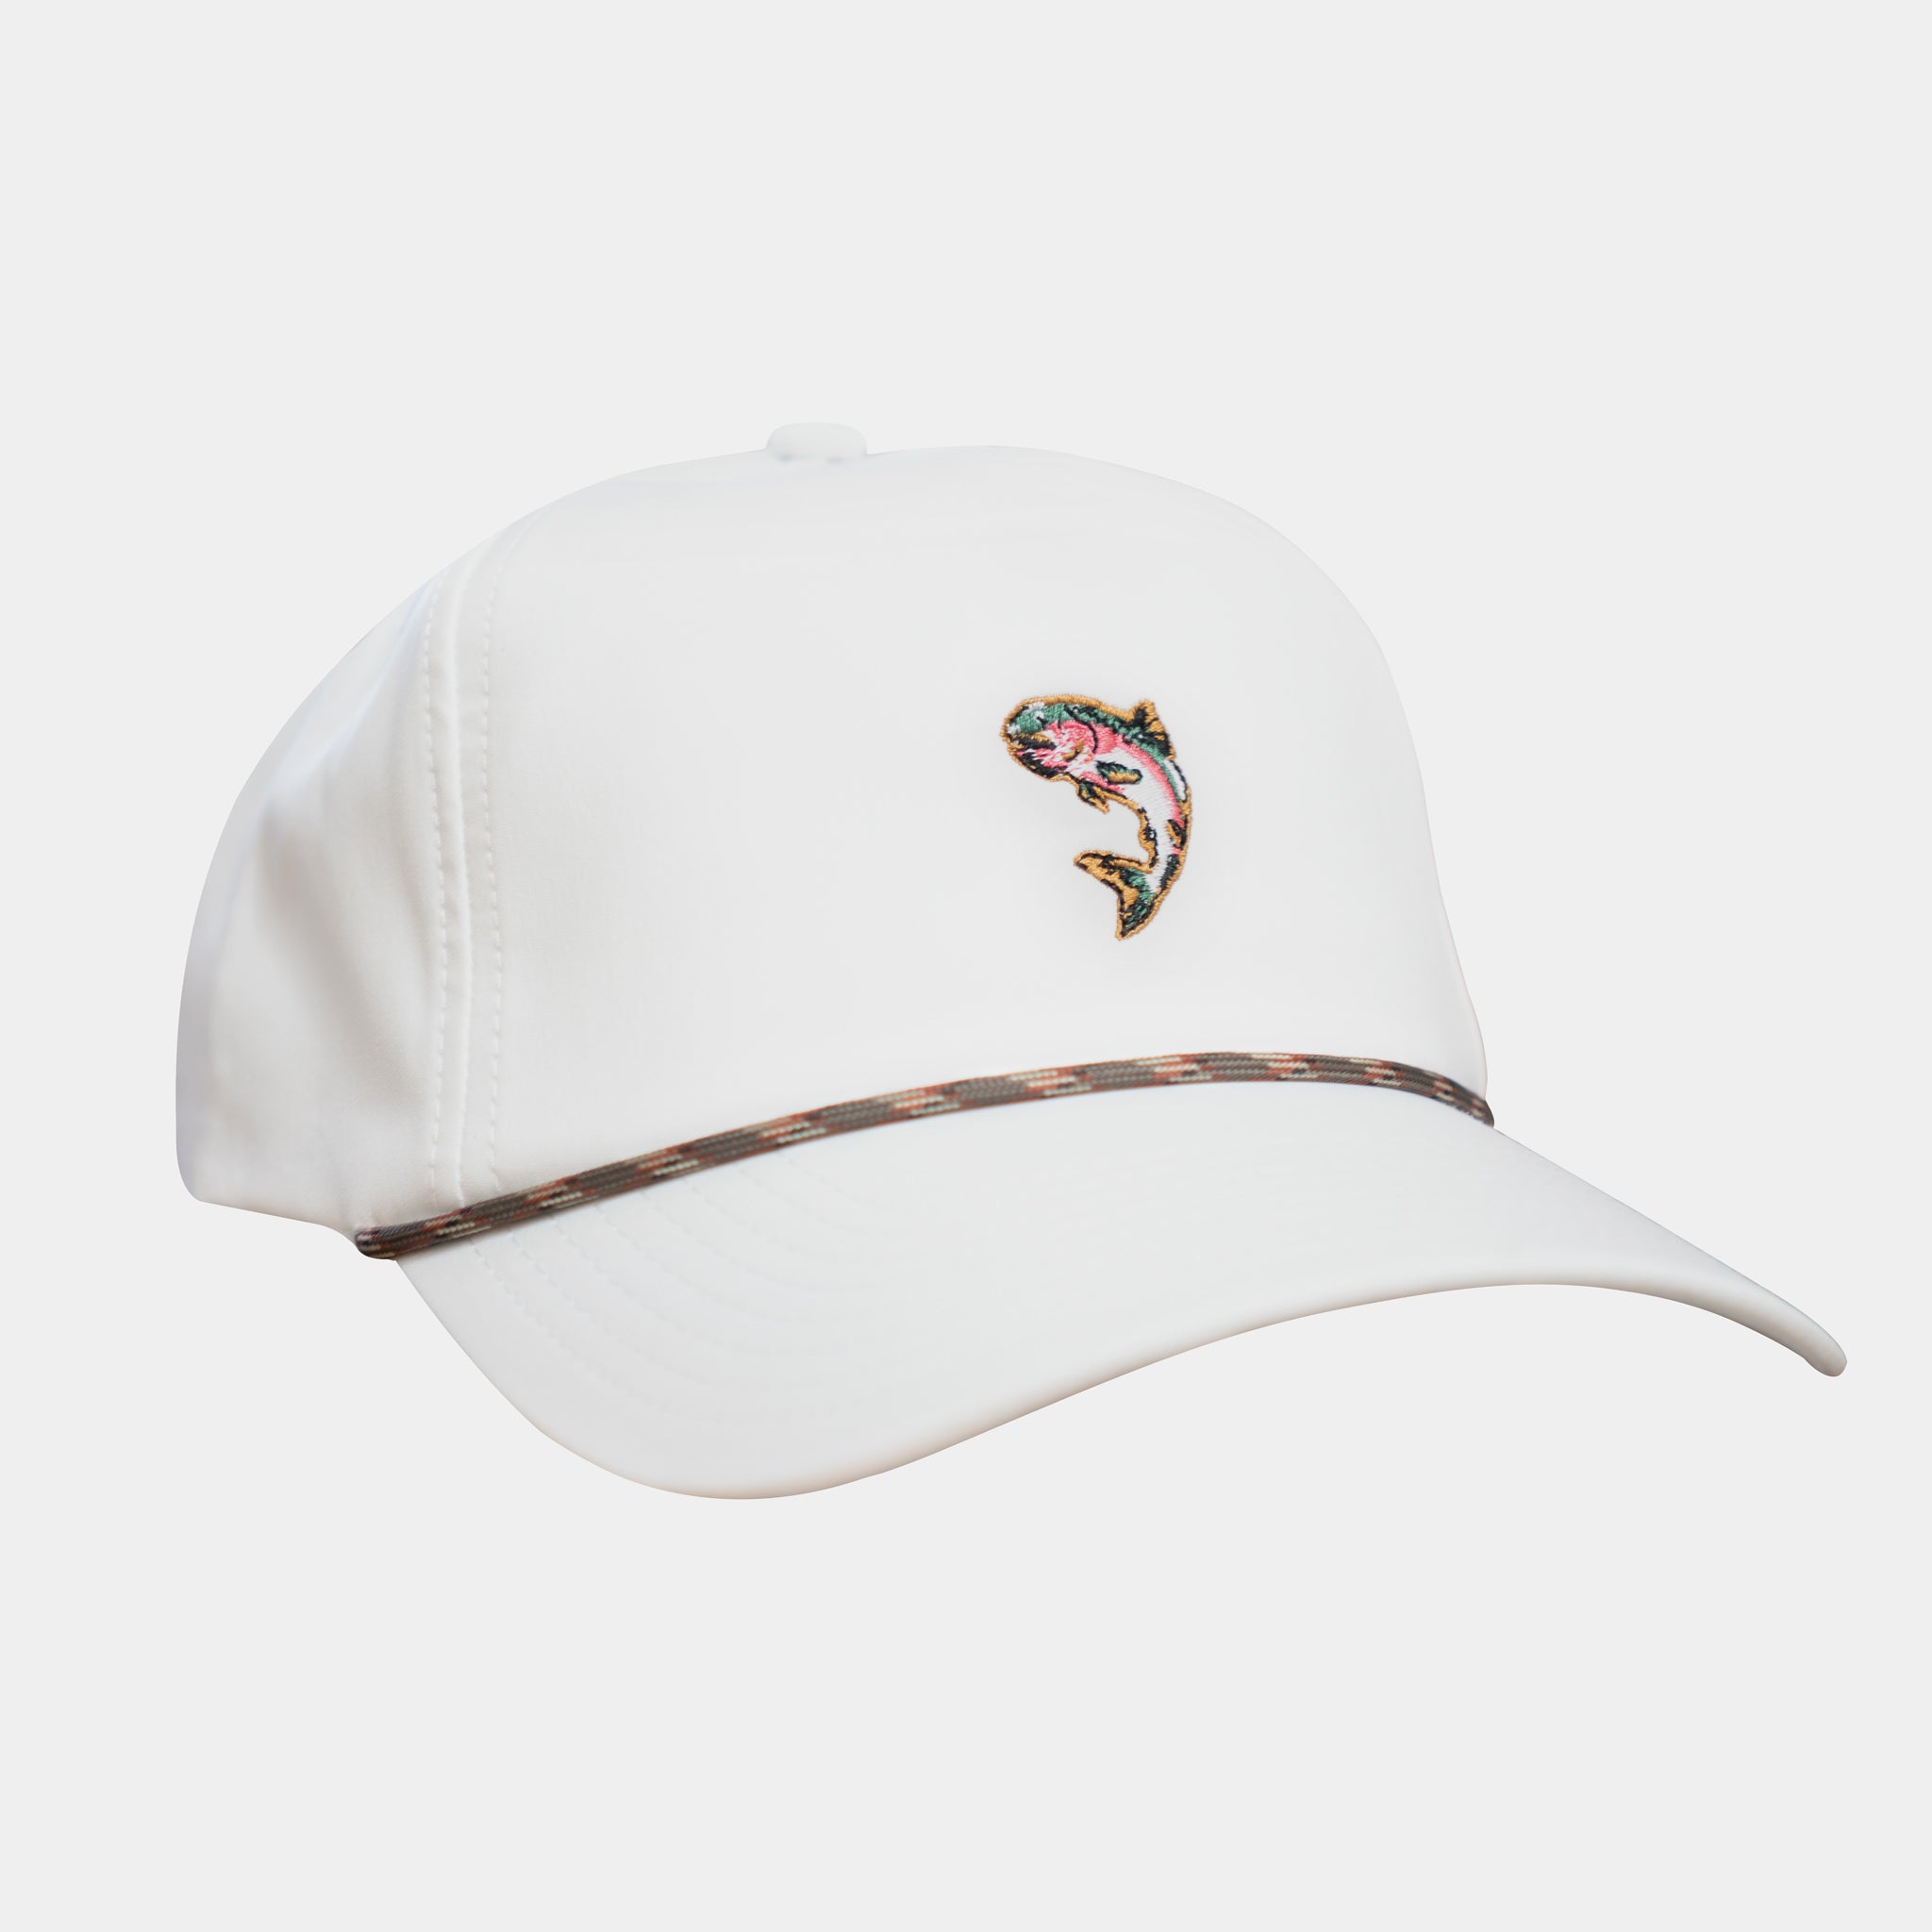 rope snapback hat with rainbow trout embroidery design 